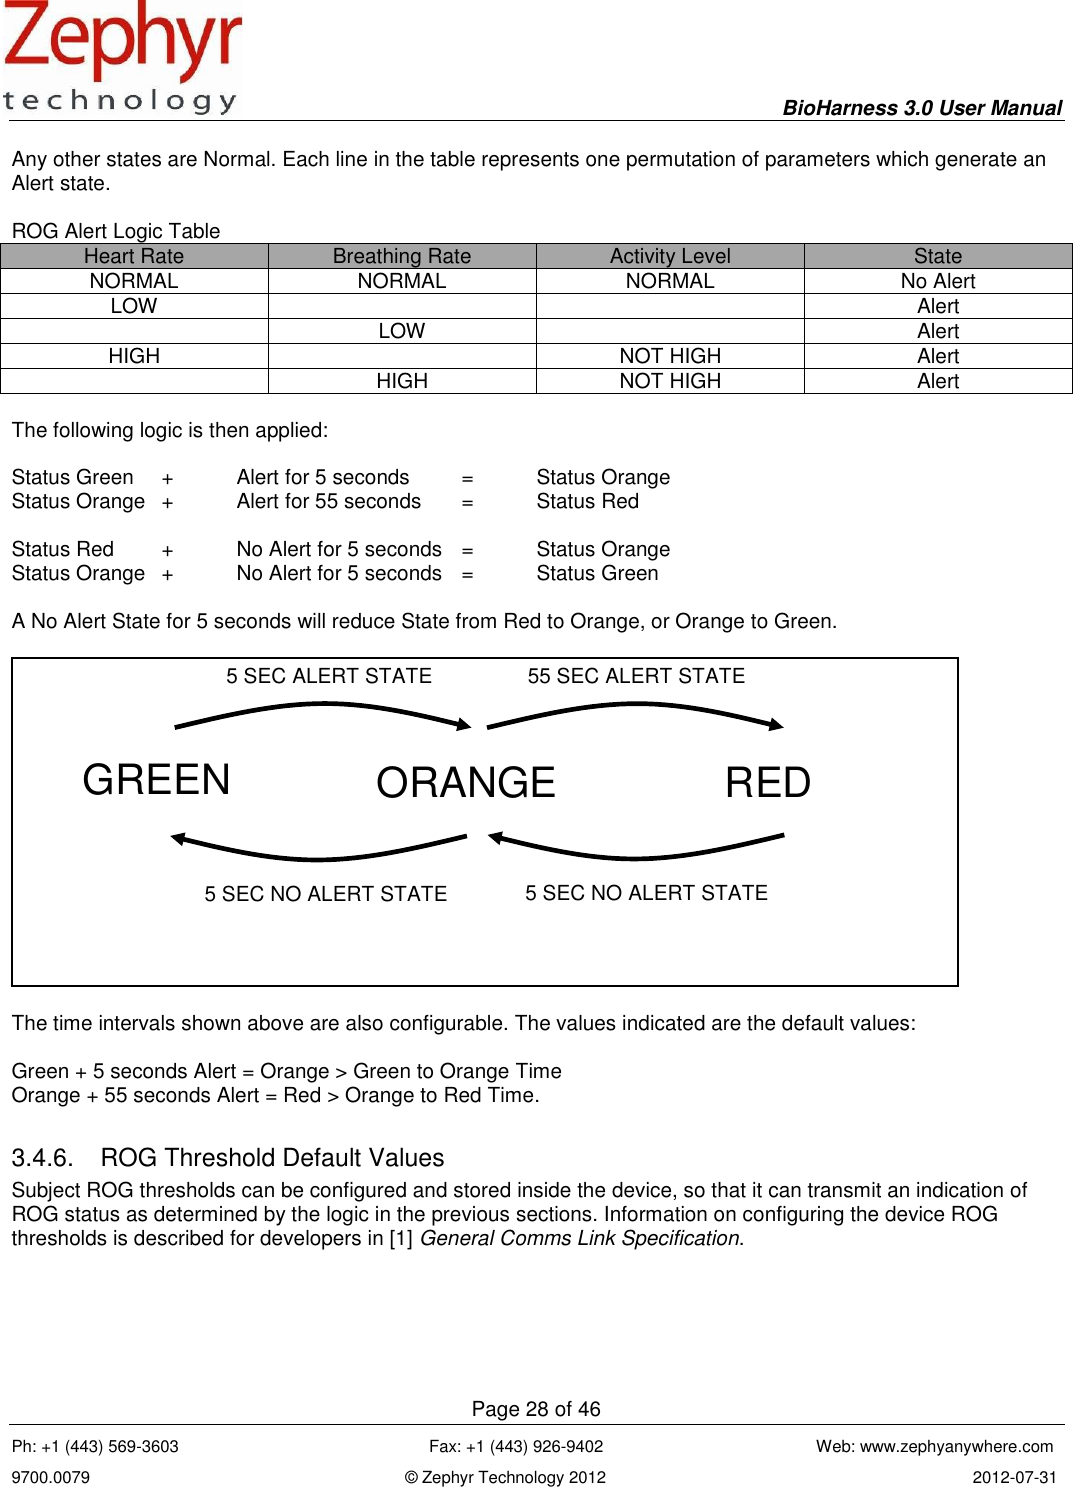     BioHarness 3.0 User Manual  Page 28 of 46 Ph: +1 (443) 569-3603                                                      Fax: +1 (443) 926-9402                                              Web: www.zephyanywhere.com 9700.0079                                                                    © Zephyr Technology 2012                                                                               2012-07-31                                                                                                                                      Any other states are Normal. Each line in the table represents one permutation of parameters which generate an Alert state.  ROG Alert Logic Table Heart Rate Breathing Rate Activity Level State NORMAL NORMAL NORMAL No Alert LOW   Alert  LOW  Alert HIGH  NOT HIGH Alert  HIGH NOT HIGH Alert  The following logic is then applied:  Status Green   +   Alert for 5 seconds   =   Status Orange Status Orange   +   Alert for 55 seconds   =   Status Red  Status Red  +  No Alert for 5 seconds  =  Status Orange Status Orange  +  No Alert for 5 seconds  =  Status Green  A No Alert State for 5 seconds will reduce State from Red to Orange, or Orange to Green.    The time intervals shown above are also configurable. The values indicated are the default values:  Green + 5 seconds Alert = Orange &gt; Green to Orange Time Orange + 55 seconds Alert = Red &gt; Orange to Red Time.  3.4.6.  ROG Threshold Default Values Subject ROG thresholds can be configured and stored inside the device, so that it can transmit an indication of ROG status as determined by the logic in the previous sections. Information on configuring the device ROG thresholds is described for developers in [1] General Comms Link Specification.     5 SEC ALERT STATE 55 SEC ALERT STATE 5 SEC NO ALERT STATE 5 SEC NO ALERT STATE GREEN ORANGE RED 